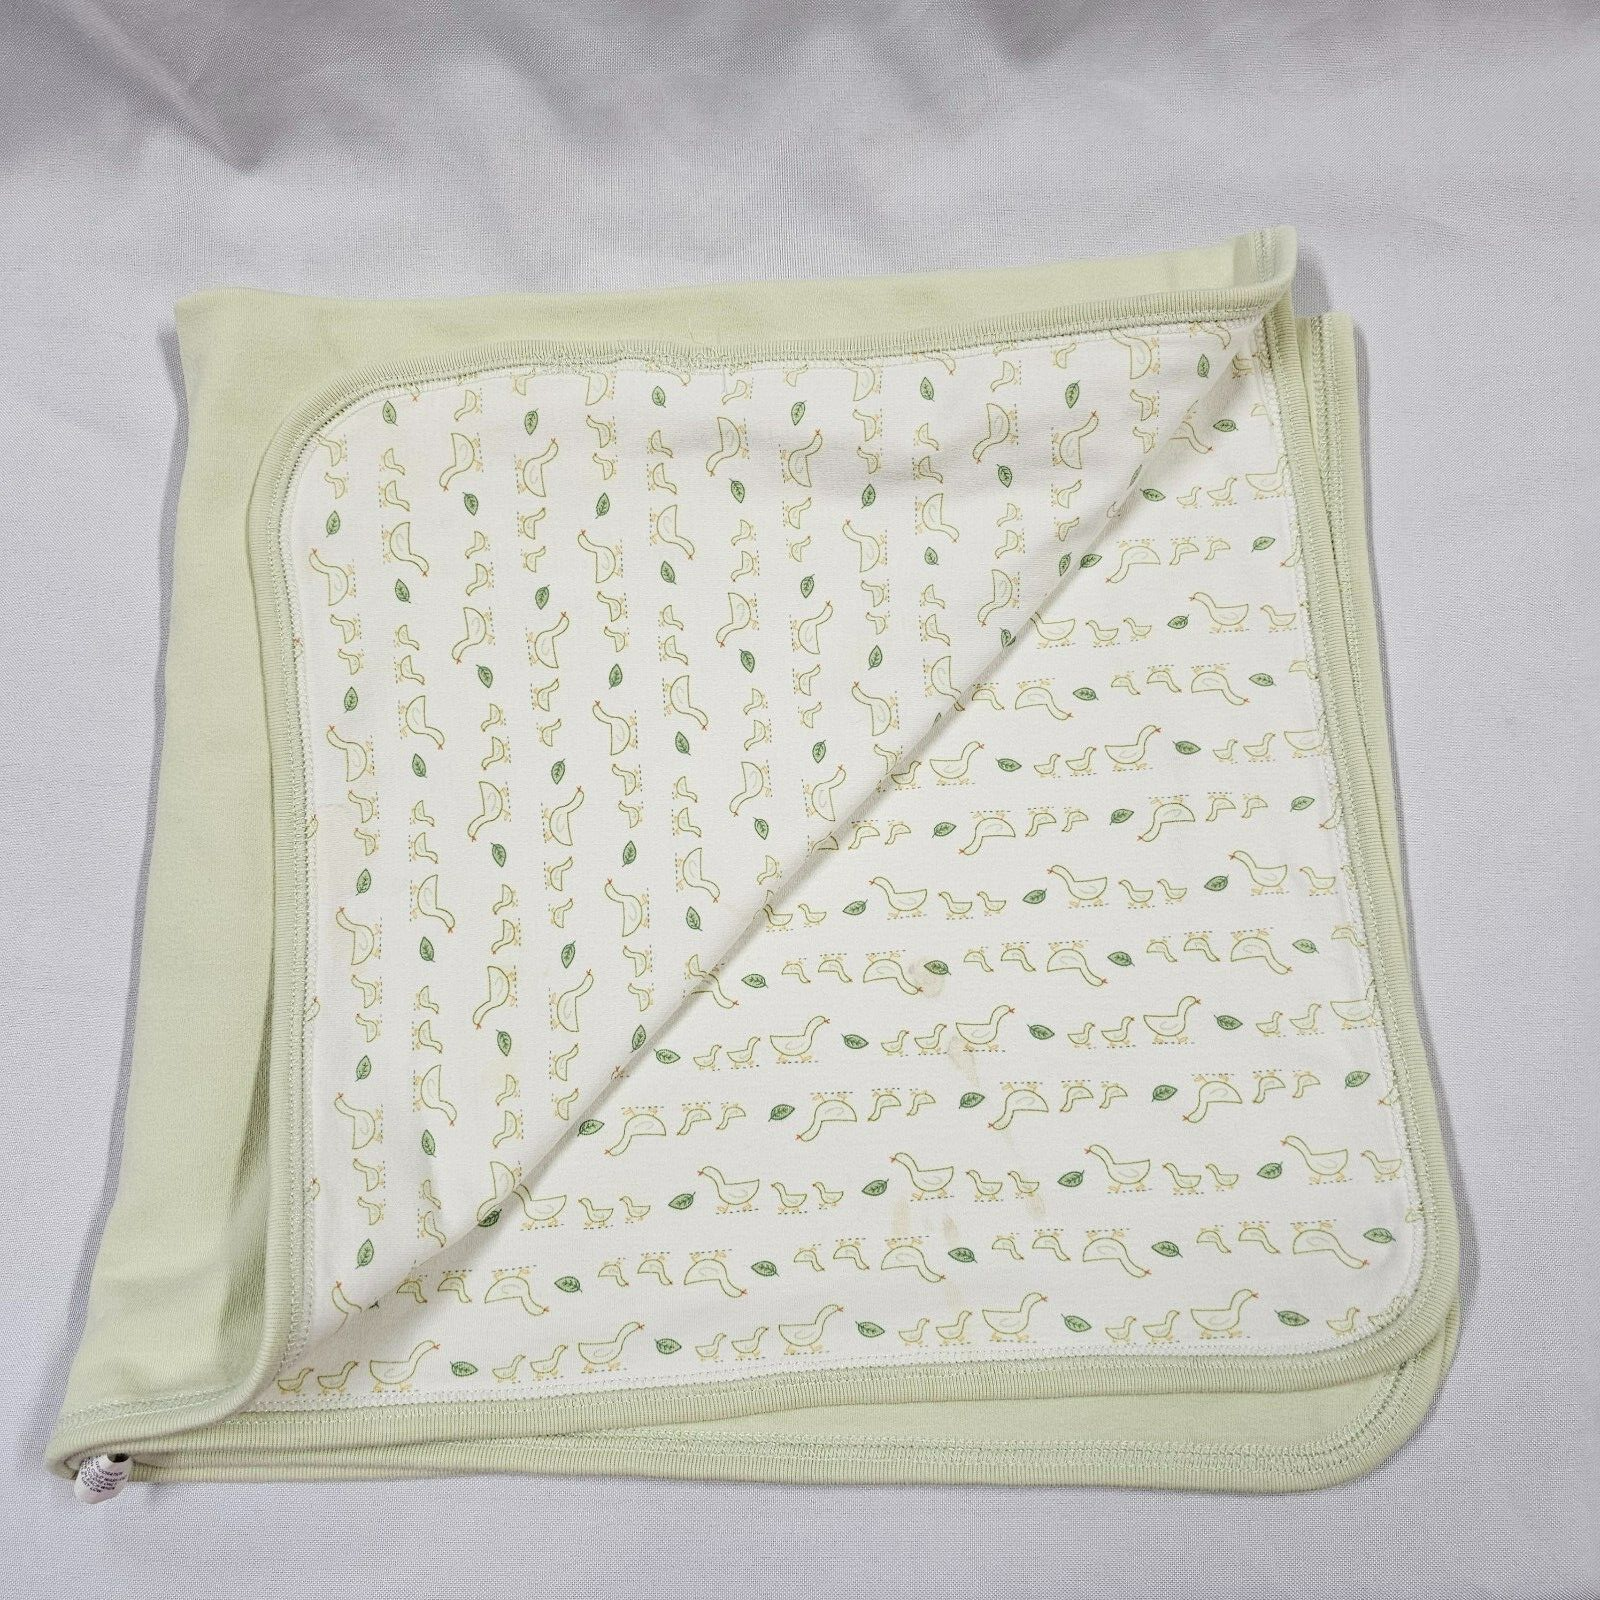 Primary image for Baby Gap White Green Goose Geese Duck Leaf Baby Blanket Cotton 28x30"